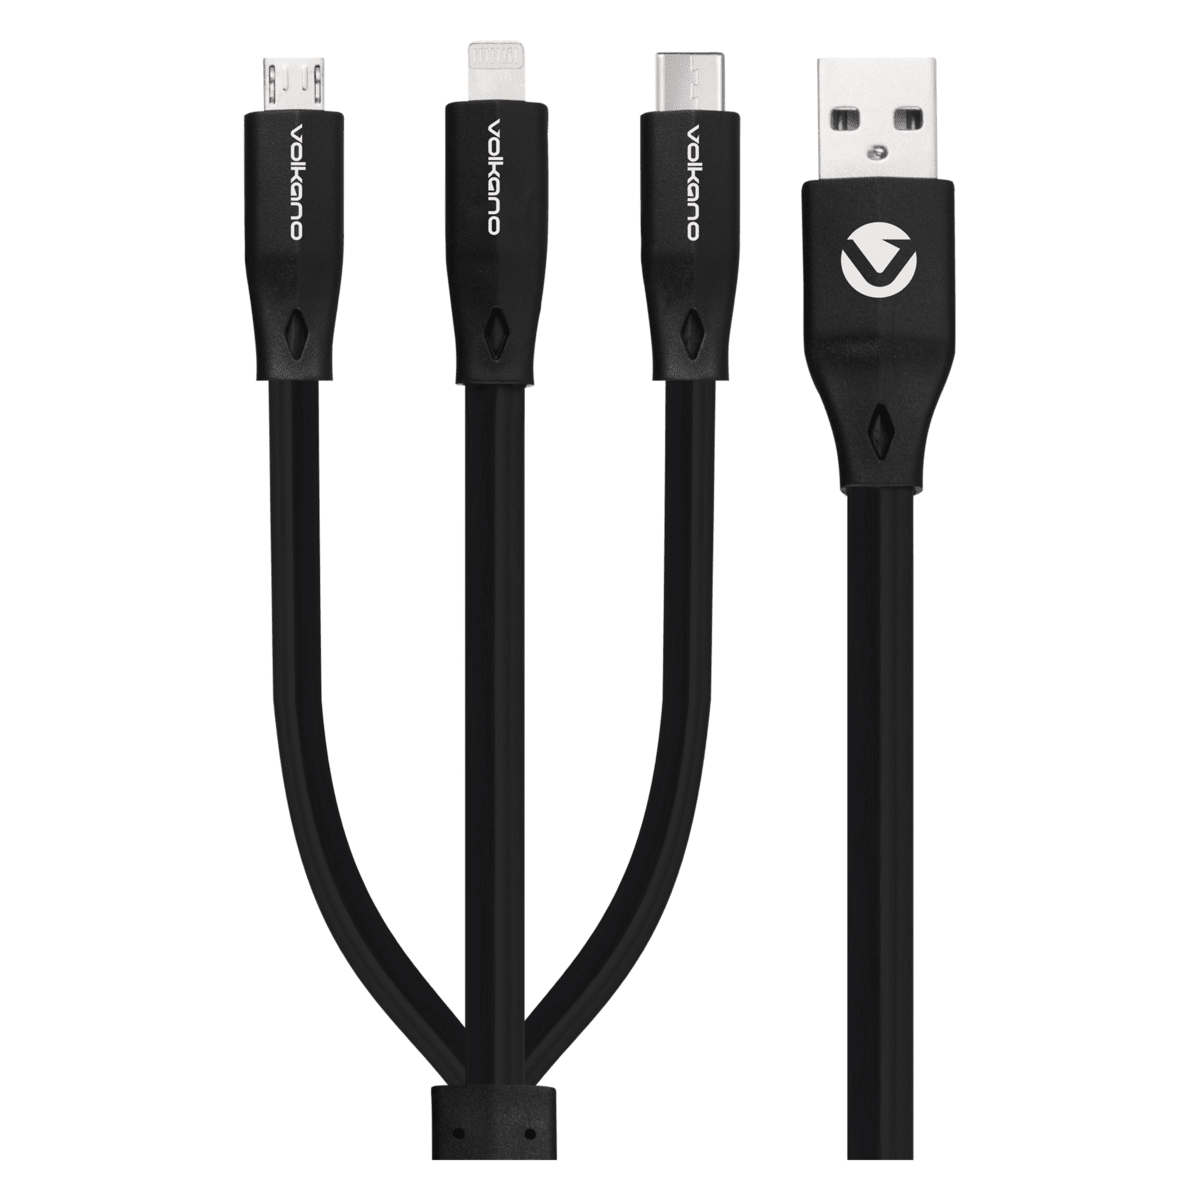 Volkano Slim Series 3-in-1 Charge Cable